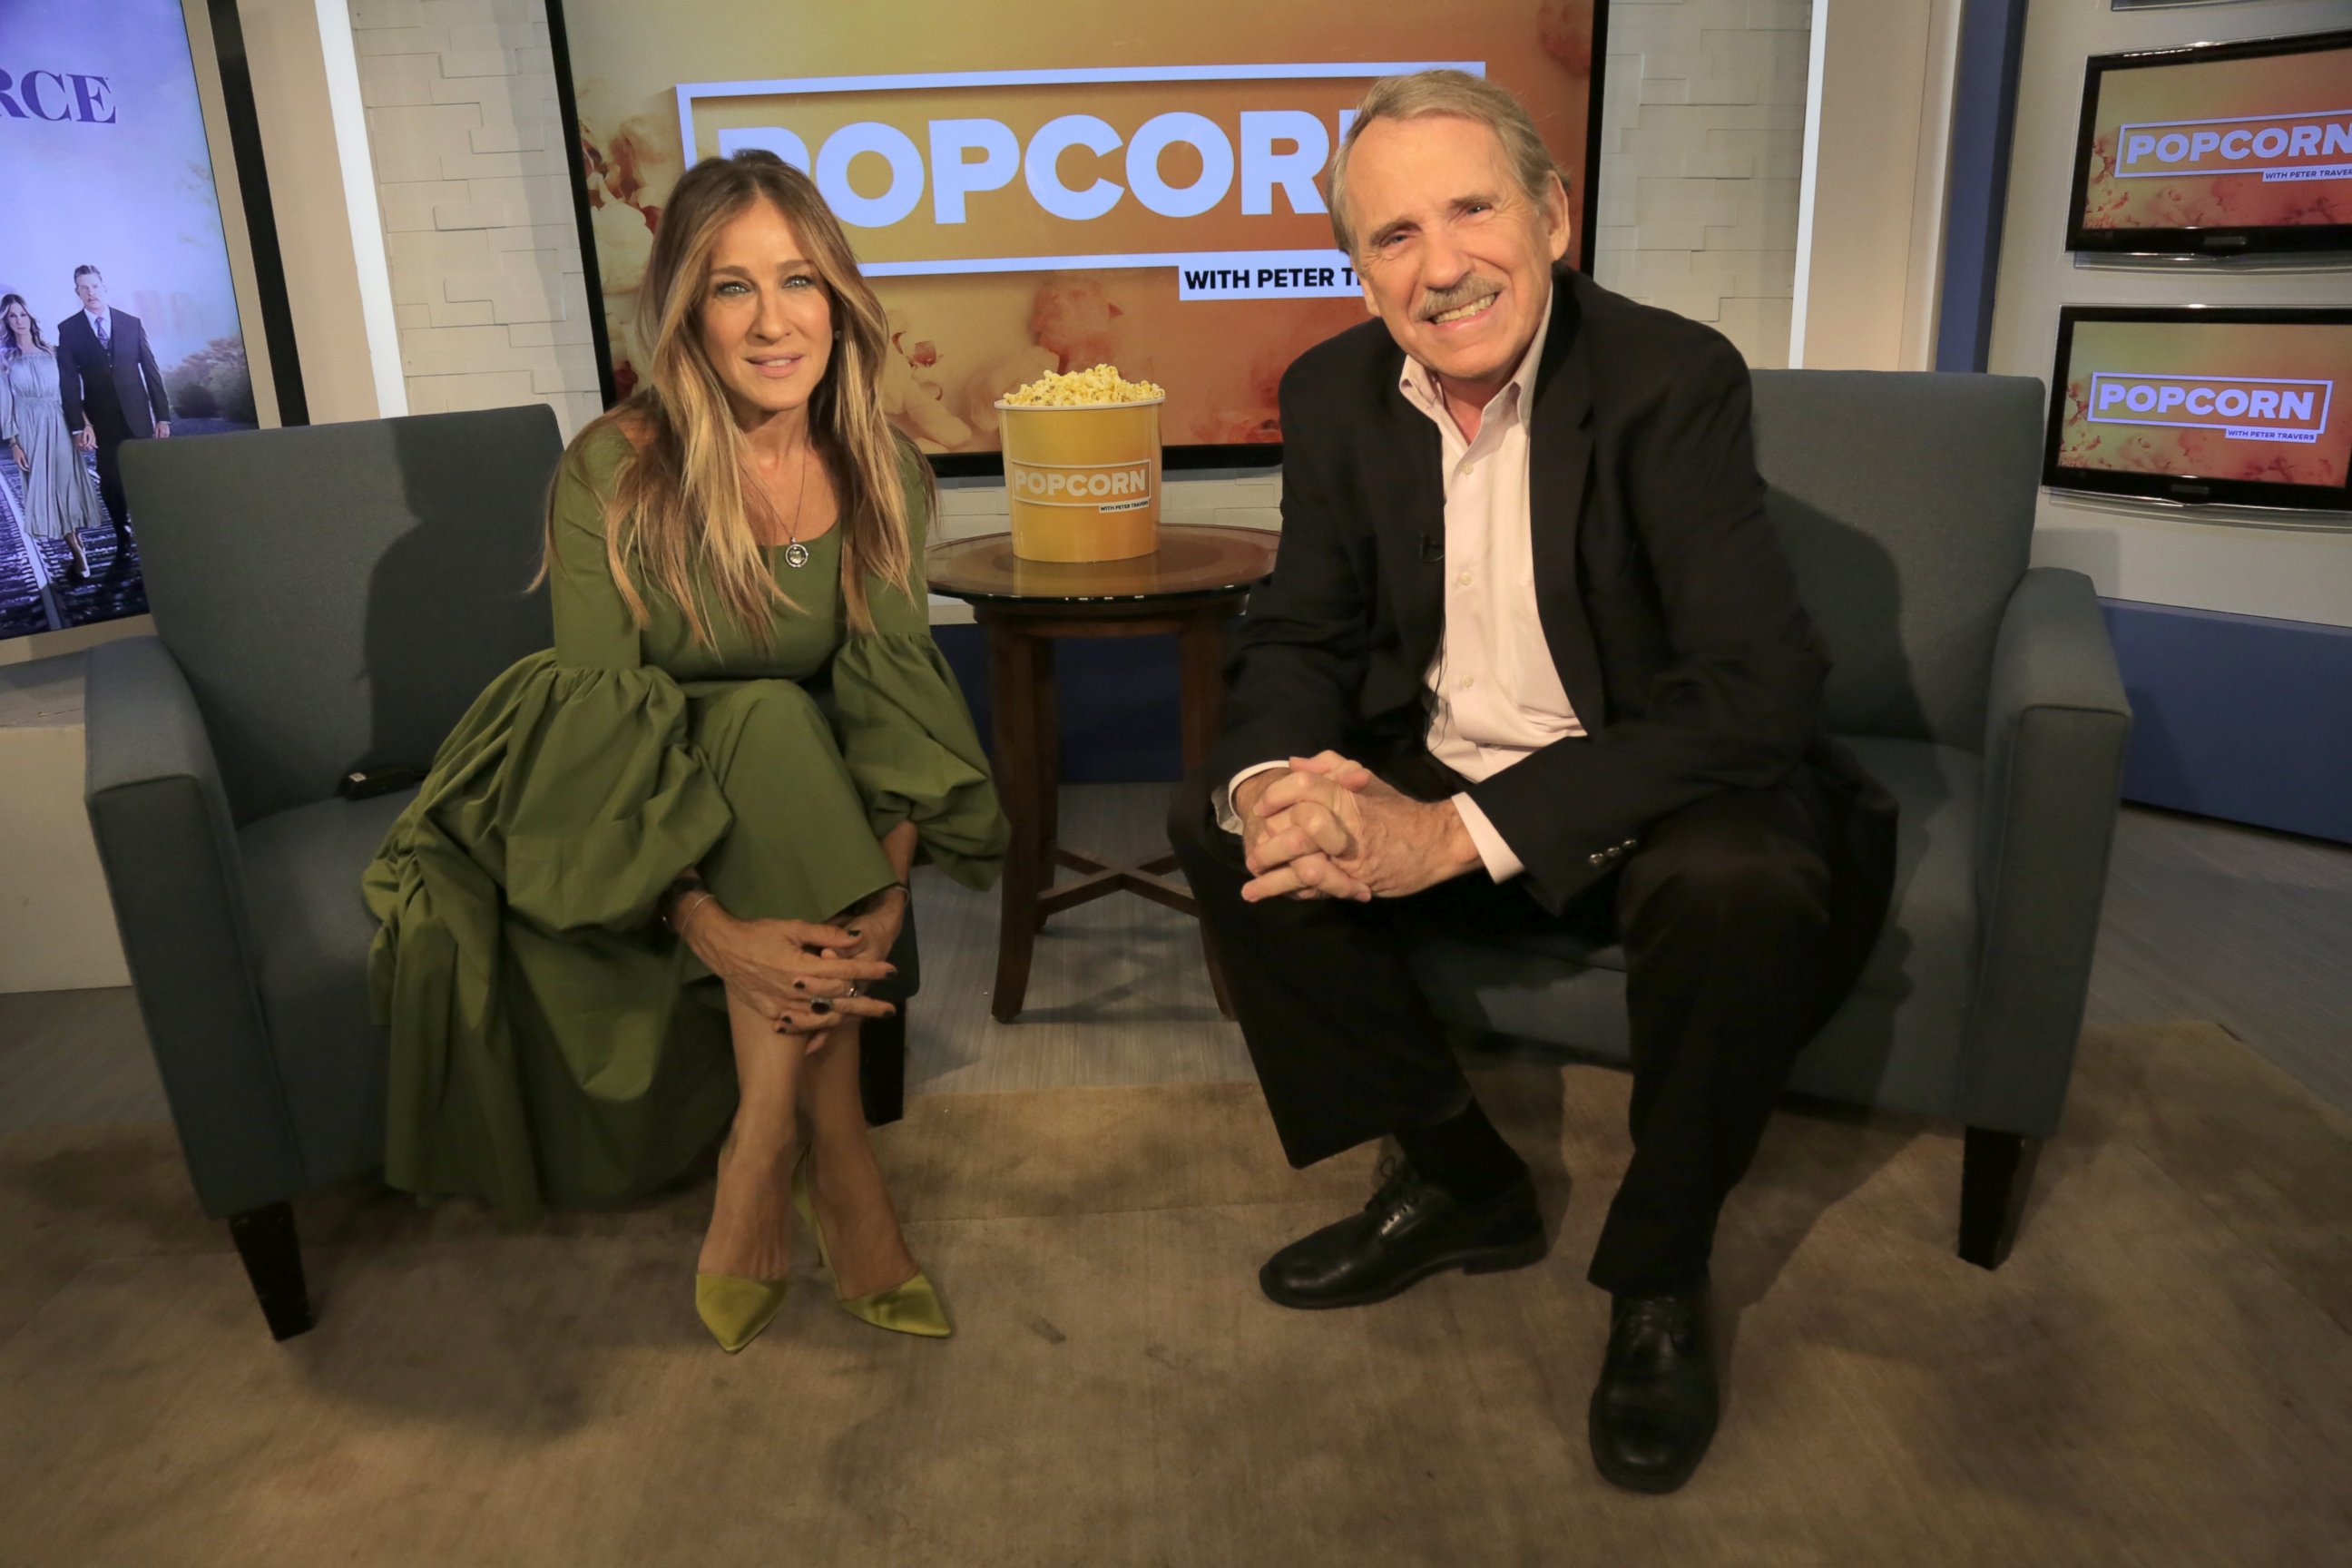 PHOTO: Sarah Jessica Parker and Peter Travers at the ABC Headquarters in New York, October 6, 2016. PHOTO: 